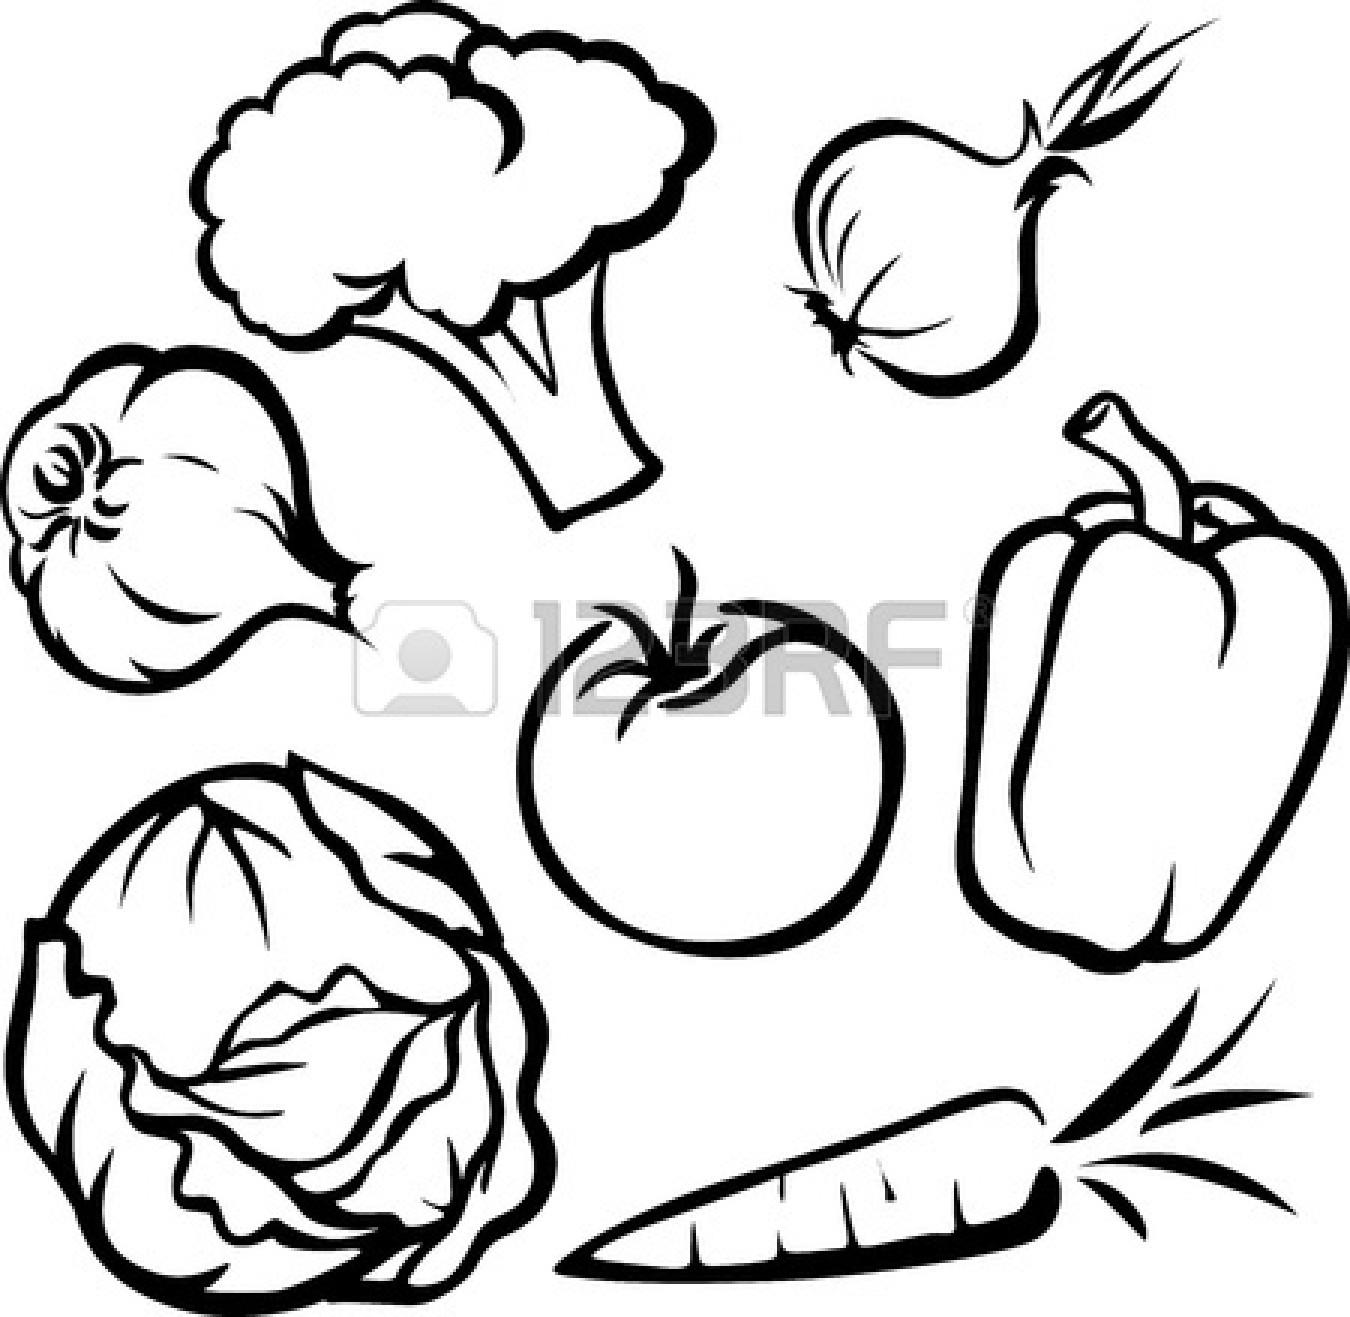 fruits and vegetables clipart outline